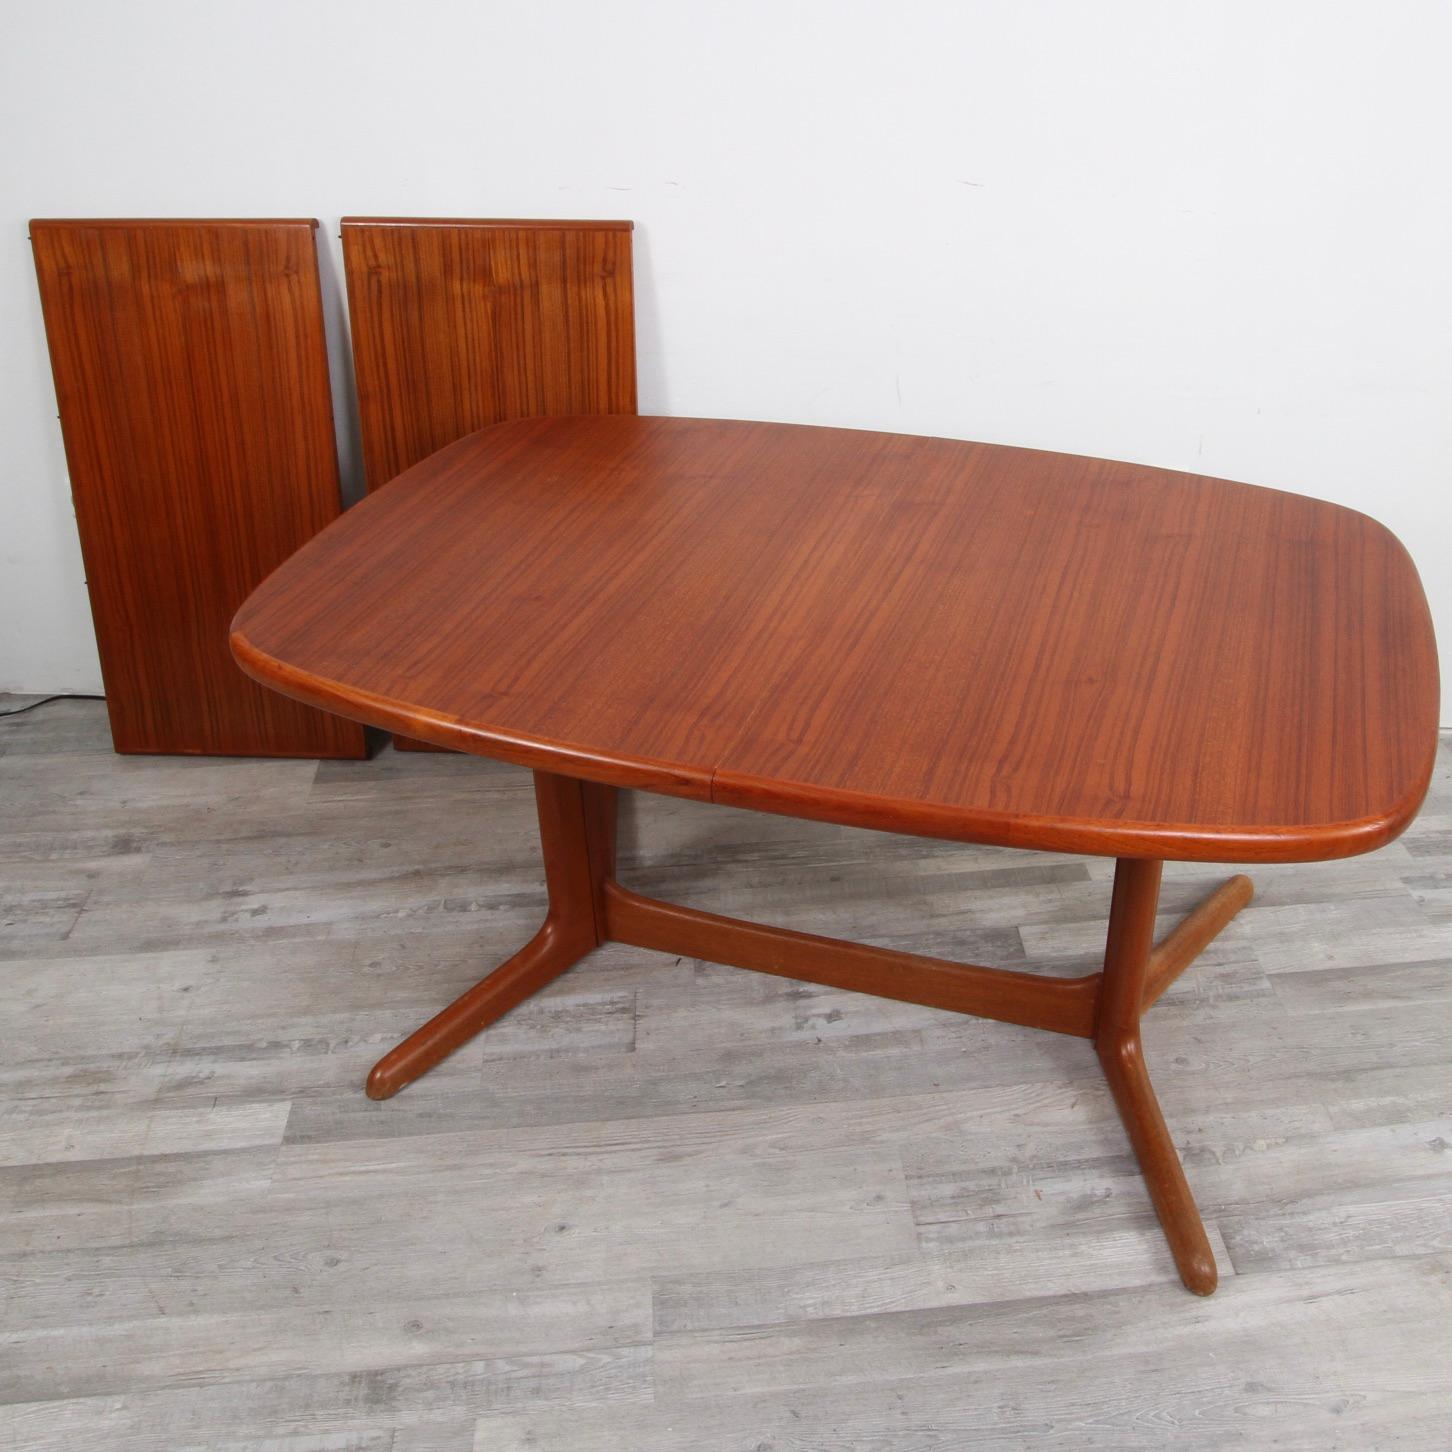 1960s Era teak expandable dining table with two 19.75